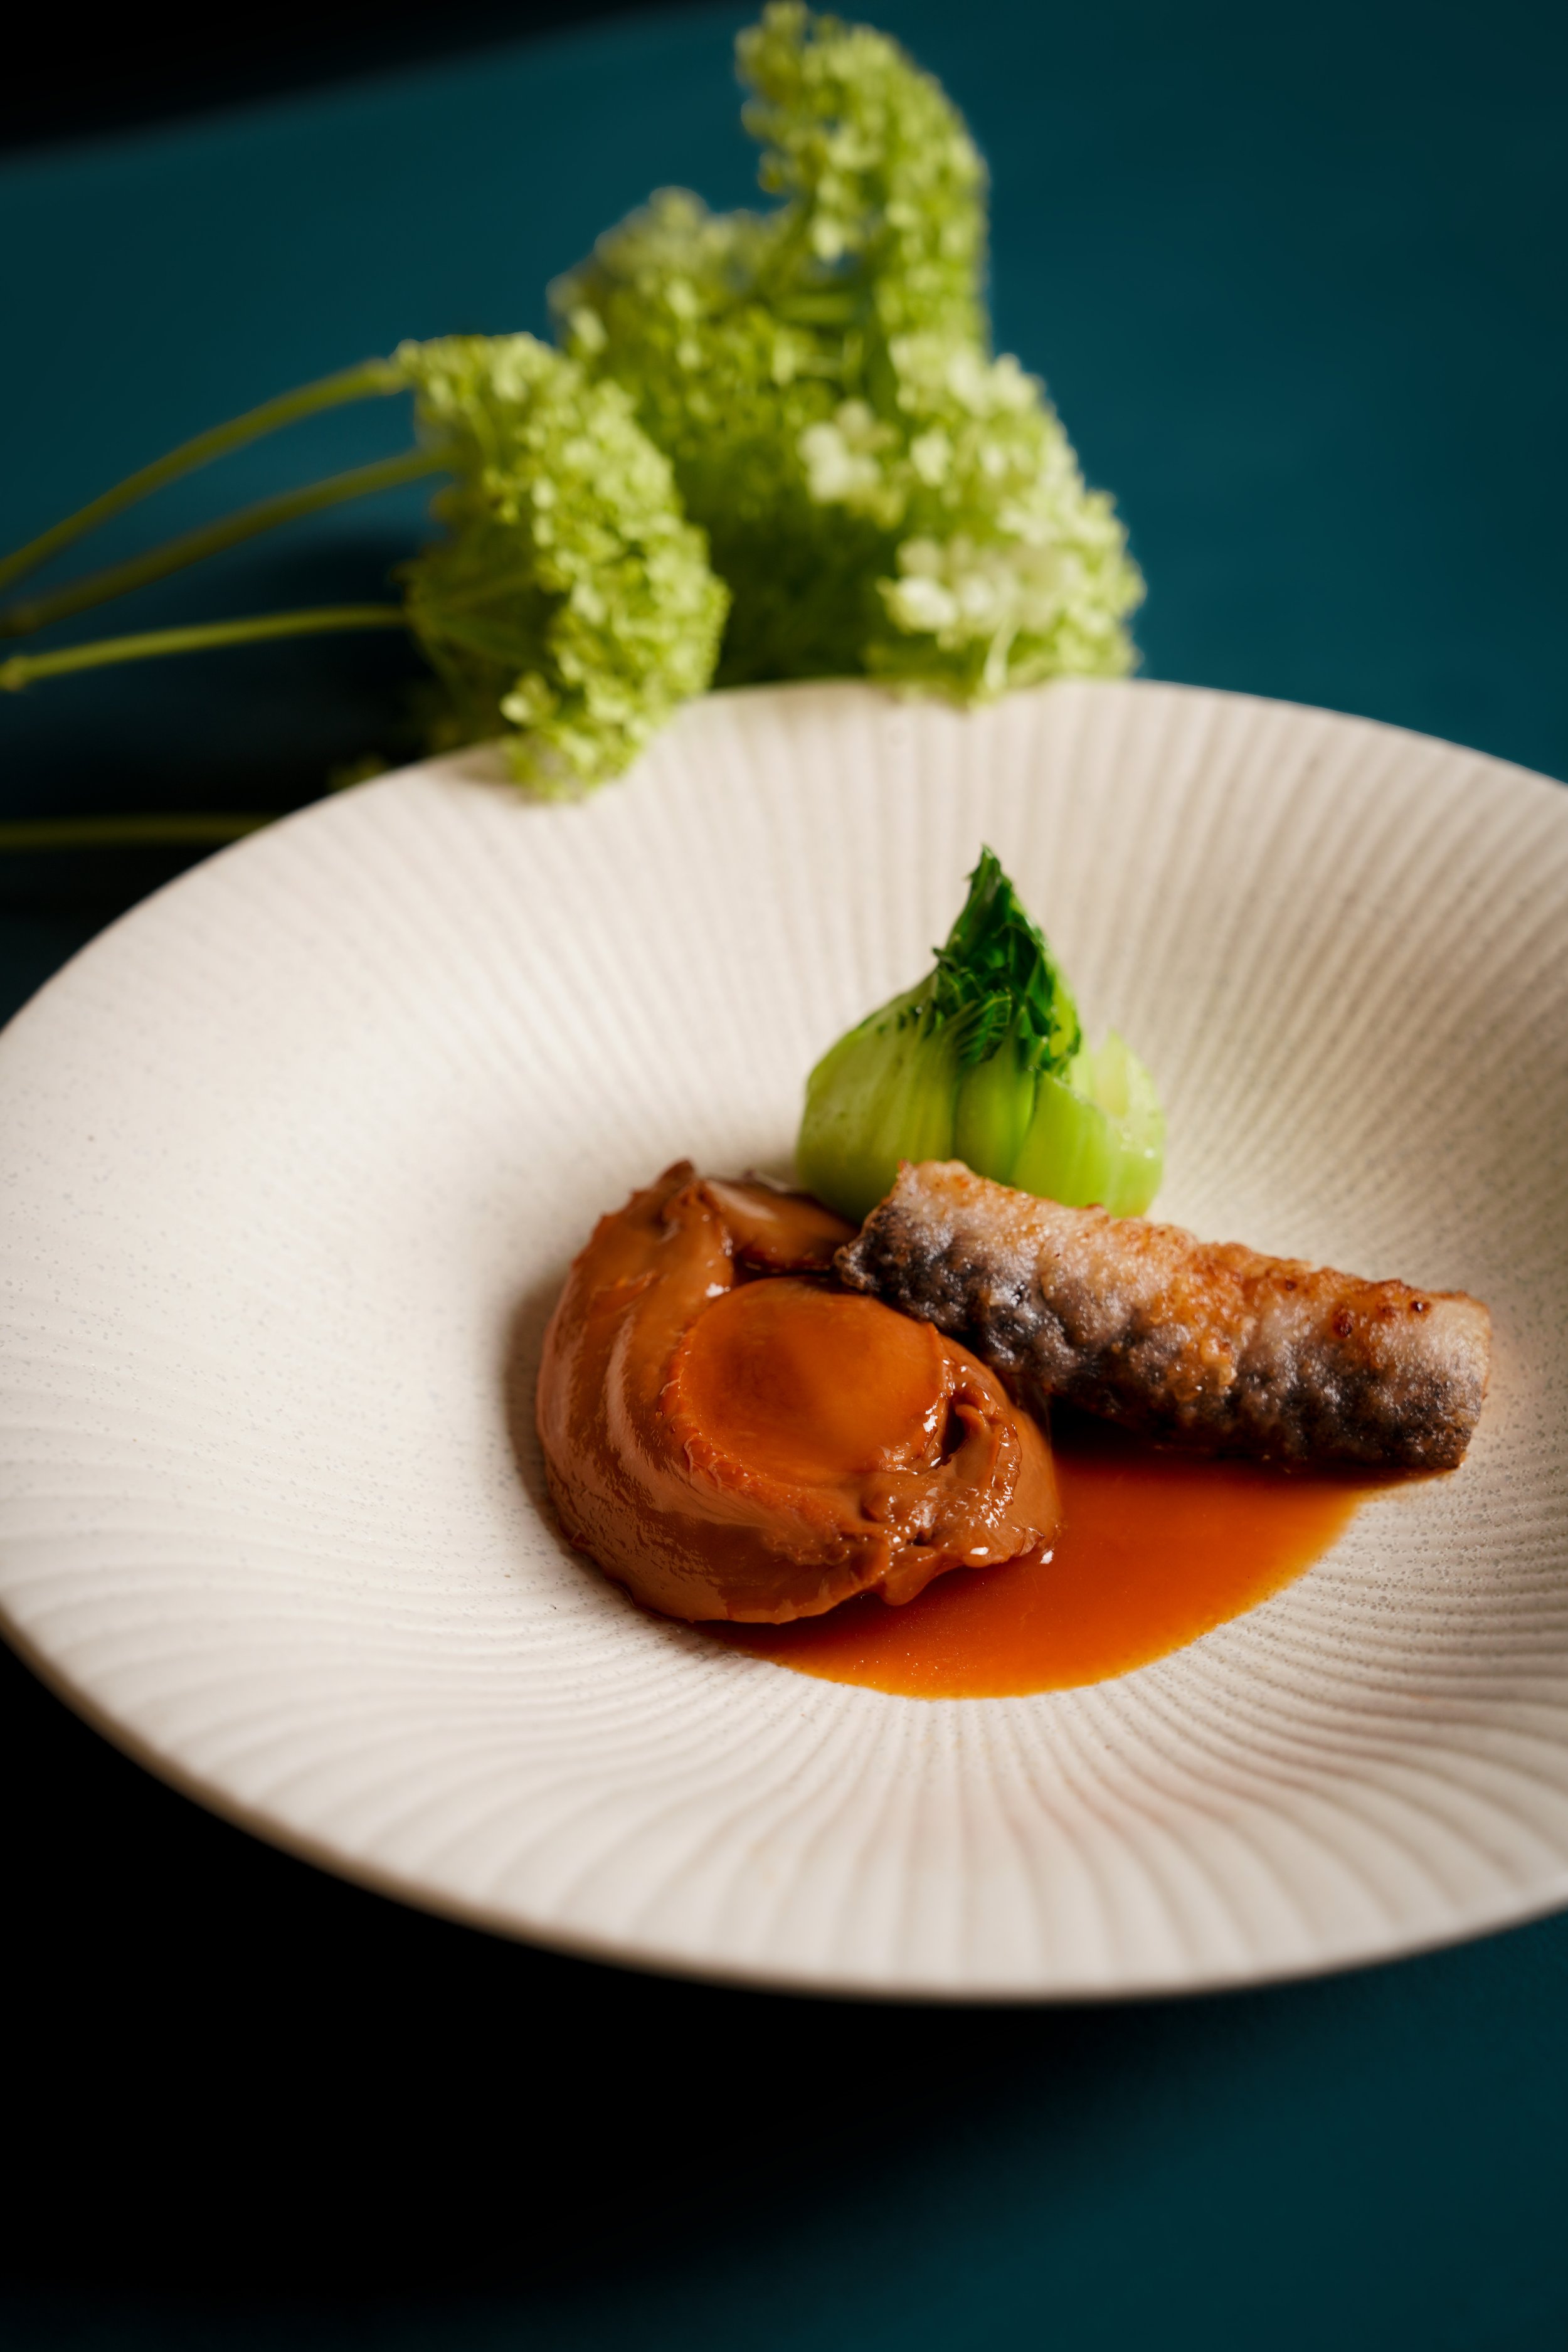 Braised Abalone (10 heads) and Fried Sea Cucumber in Abalone Sauce 十頭鮑魚脆婆參.jpg